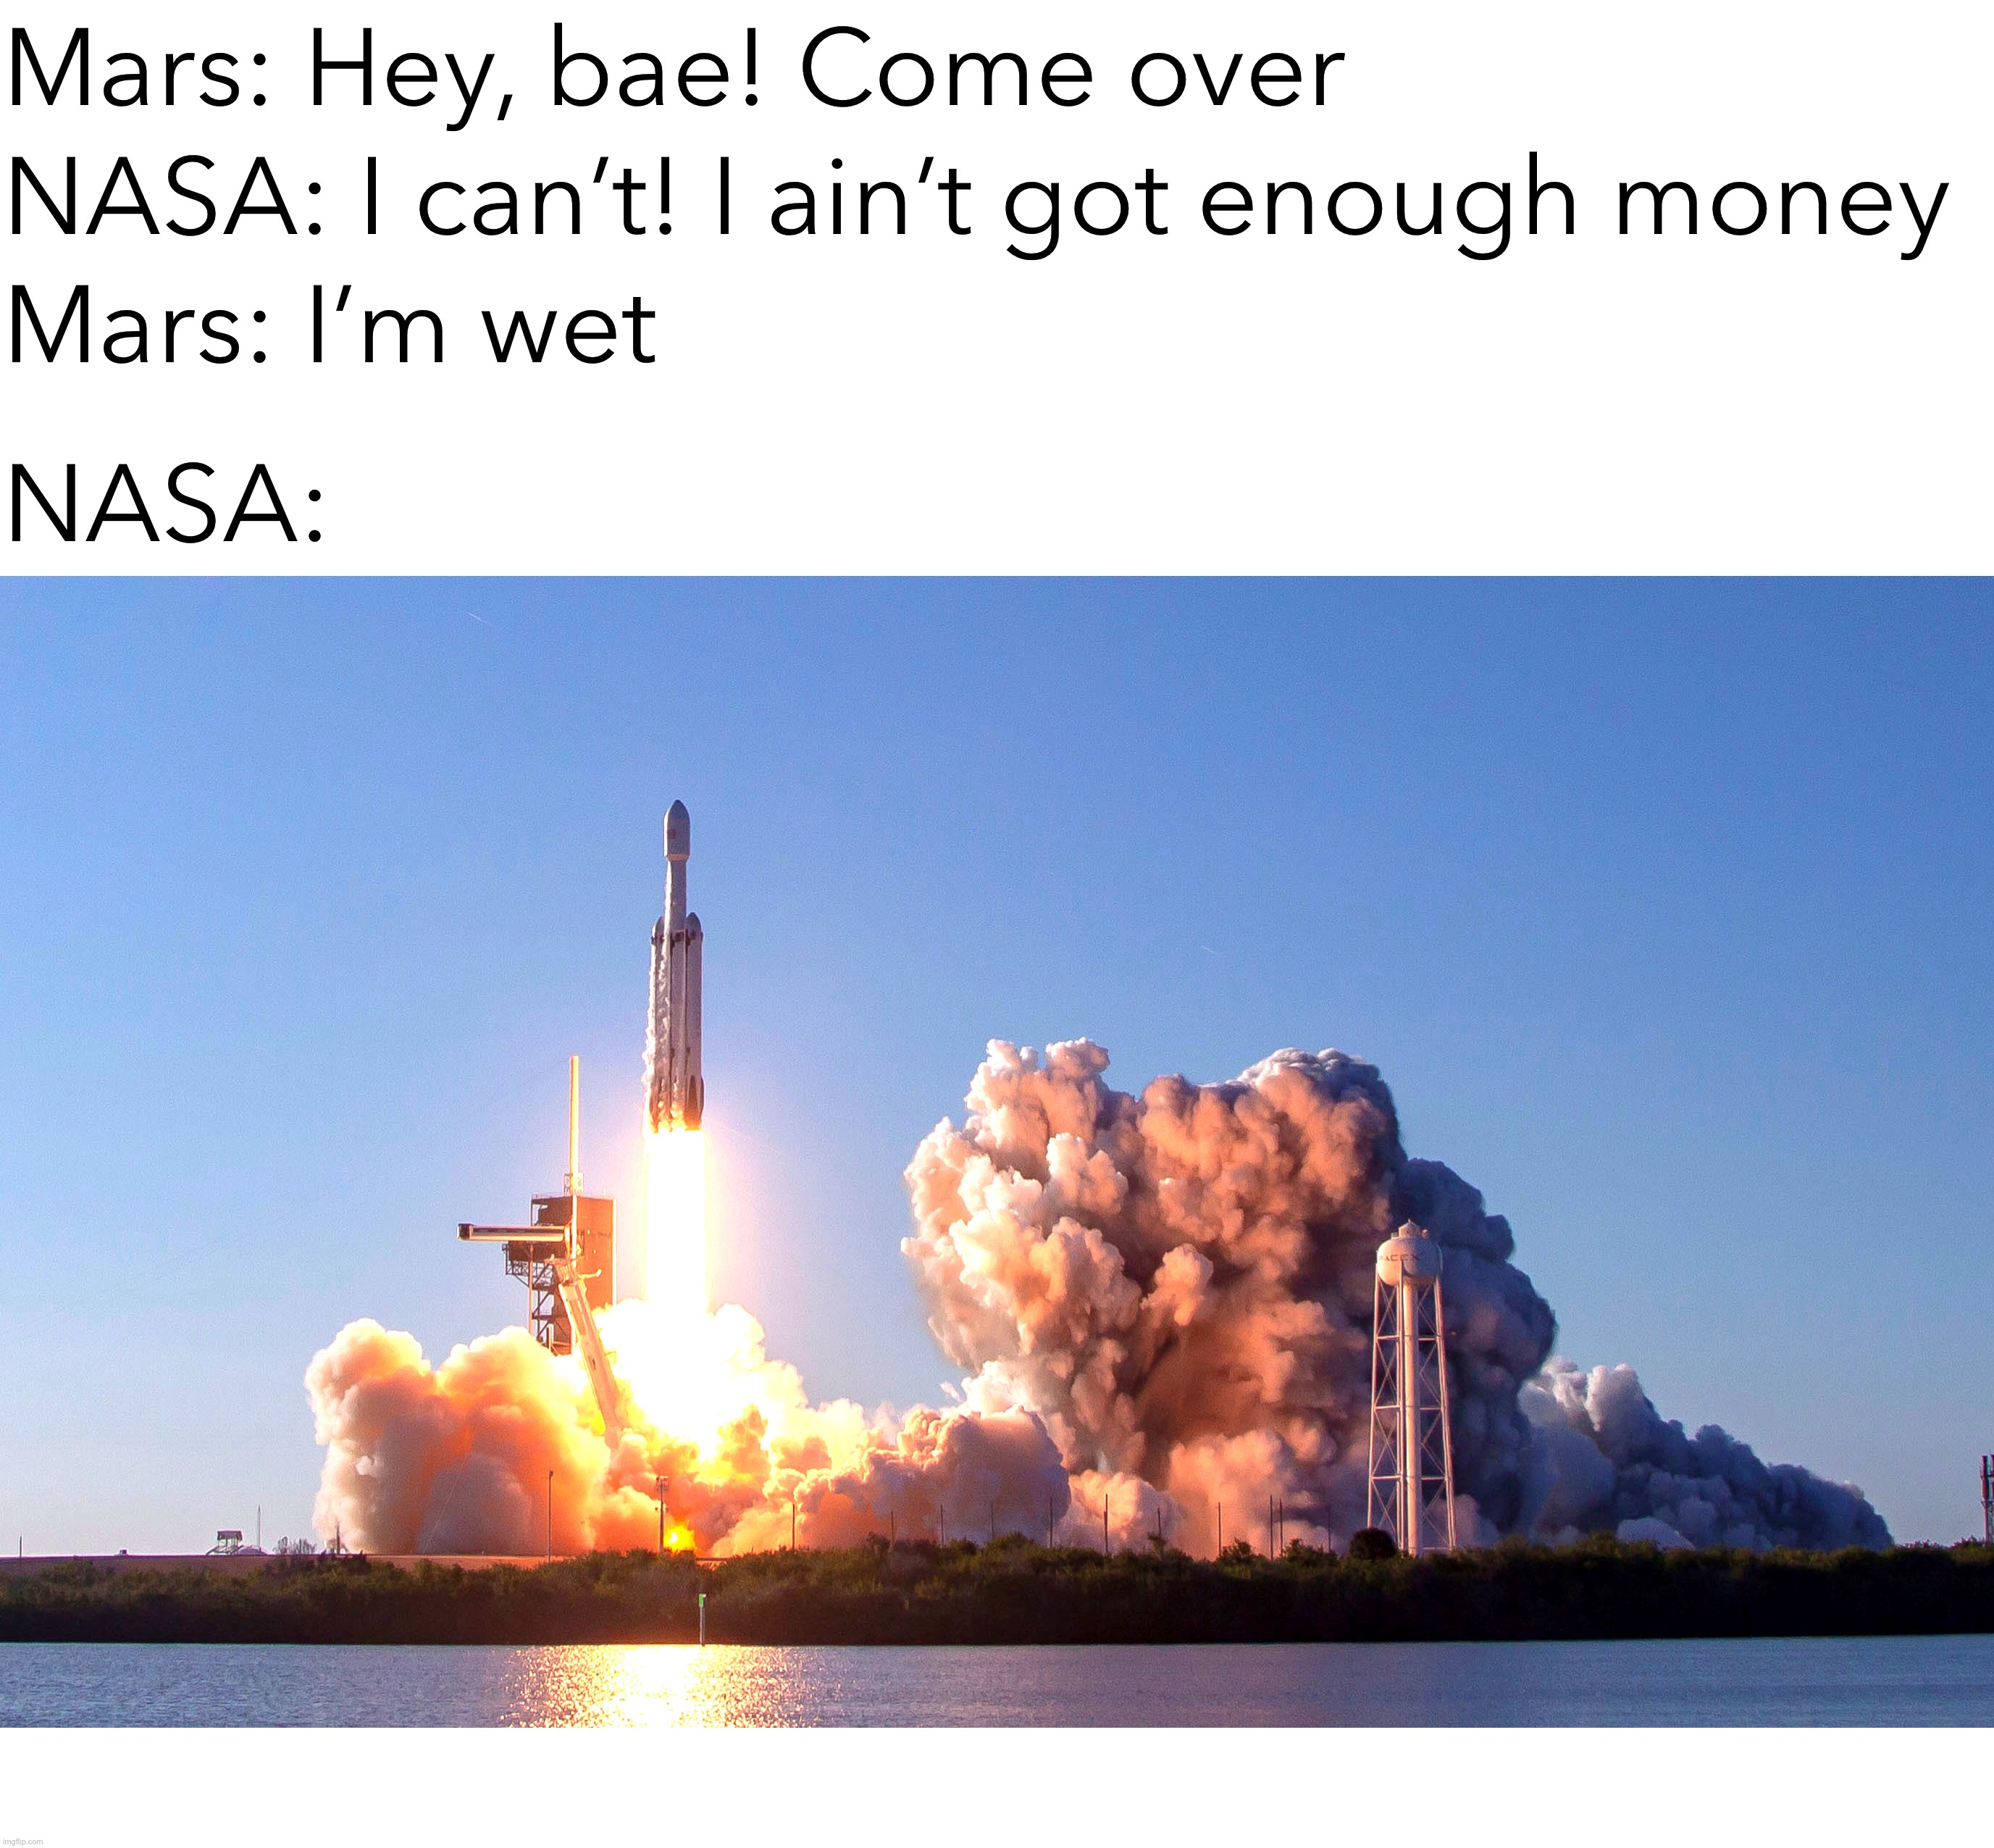 Double Meaning | Mars: Hey, bae! Come over; NASA: I can’t! I ain’t got enough money; Mars: I’m wet; NASA: | image tagged in memes,dank memes,funny,astronomy,mars,science | made w/ Imgflip meme maker